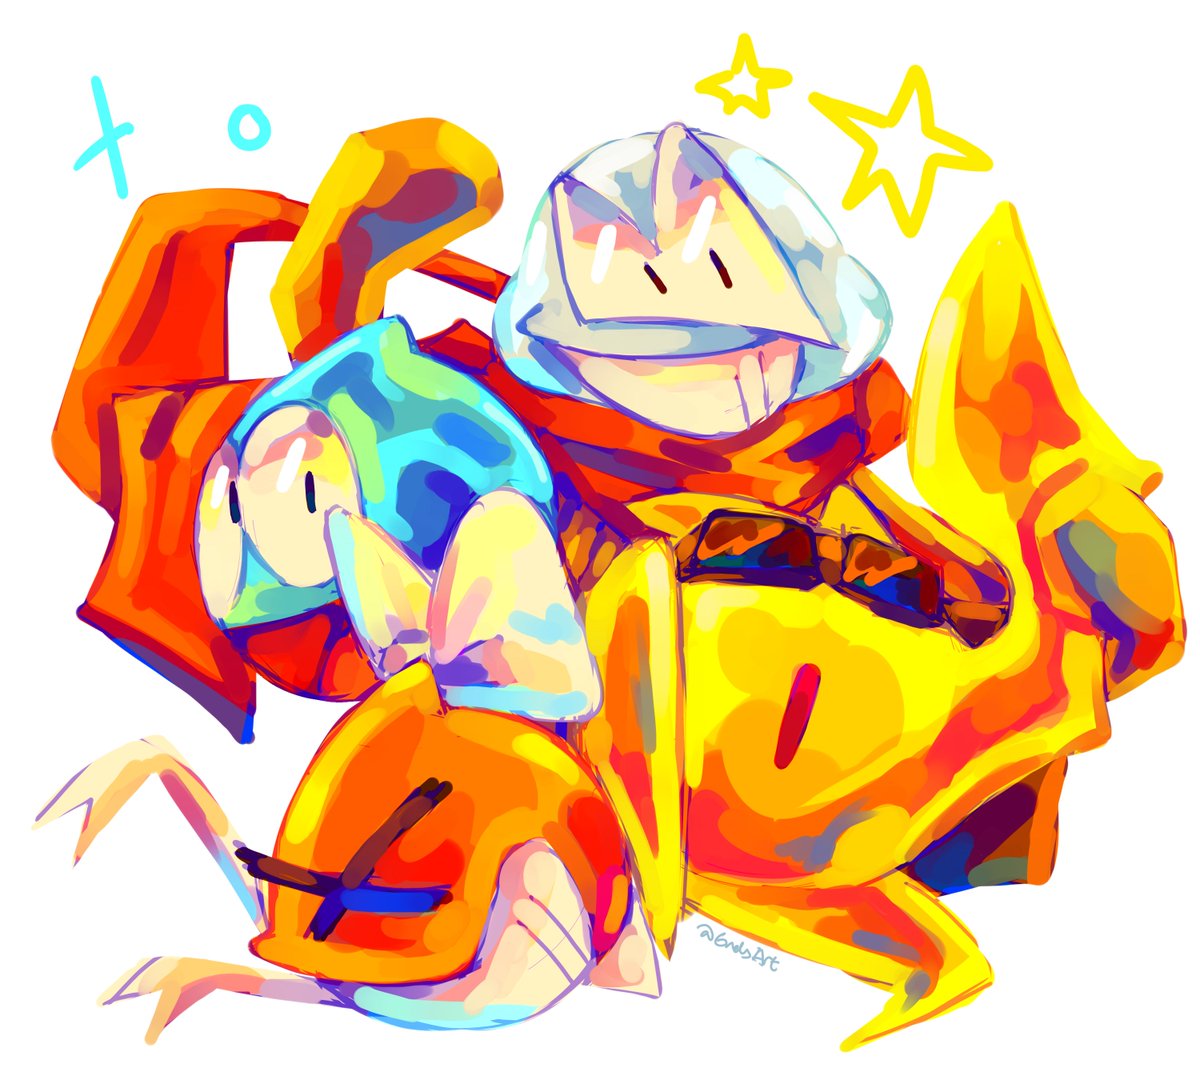 「rocket and his friends for slime day :]]」|end 💥 eyestrain ⚠️NEW comms 📌のイラスト